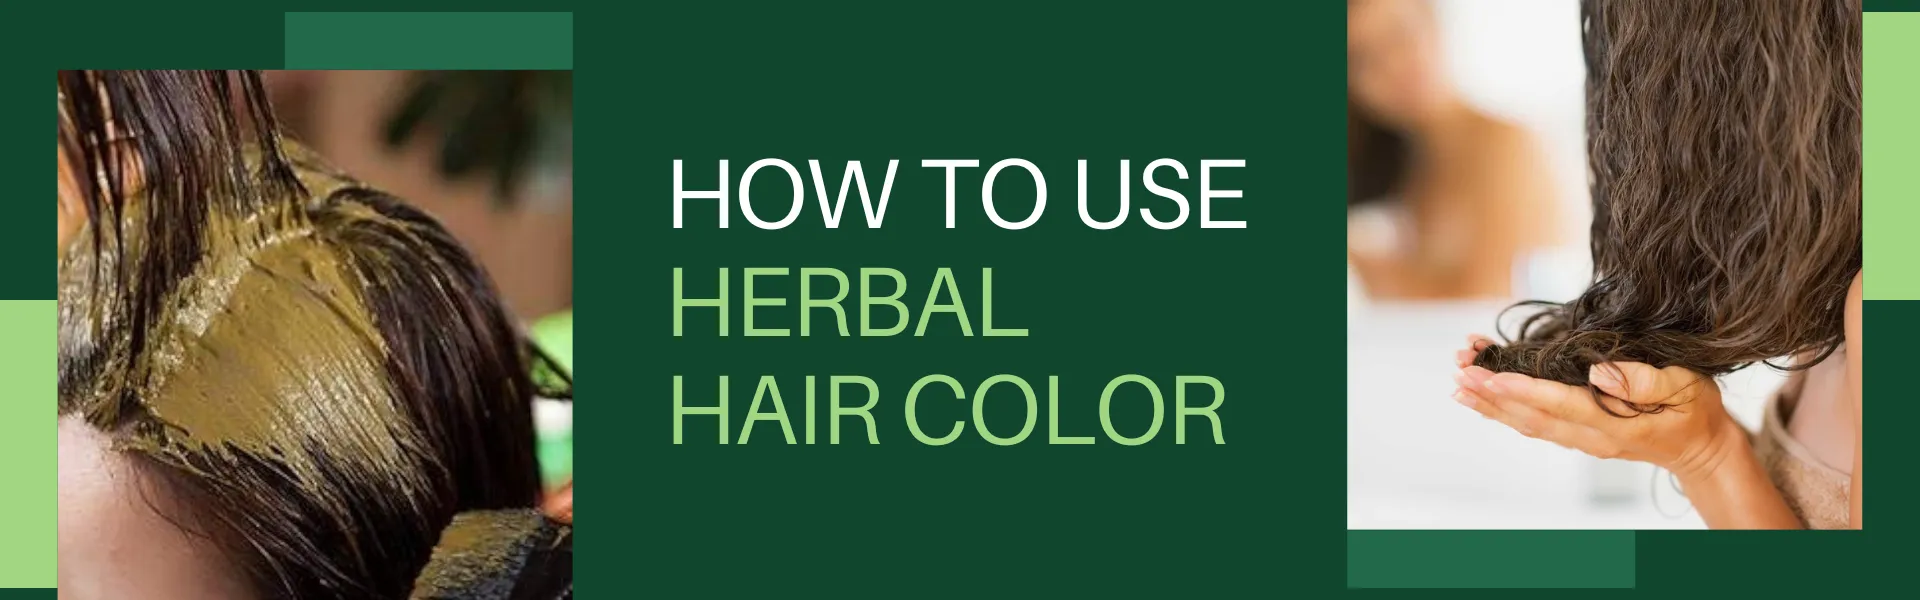 how to use herbal hair color - www.dkihenna.com